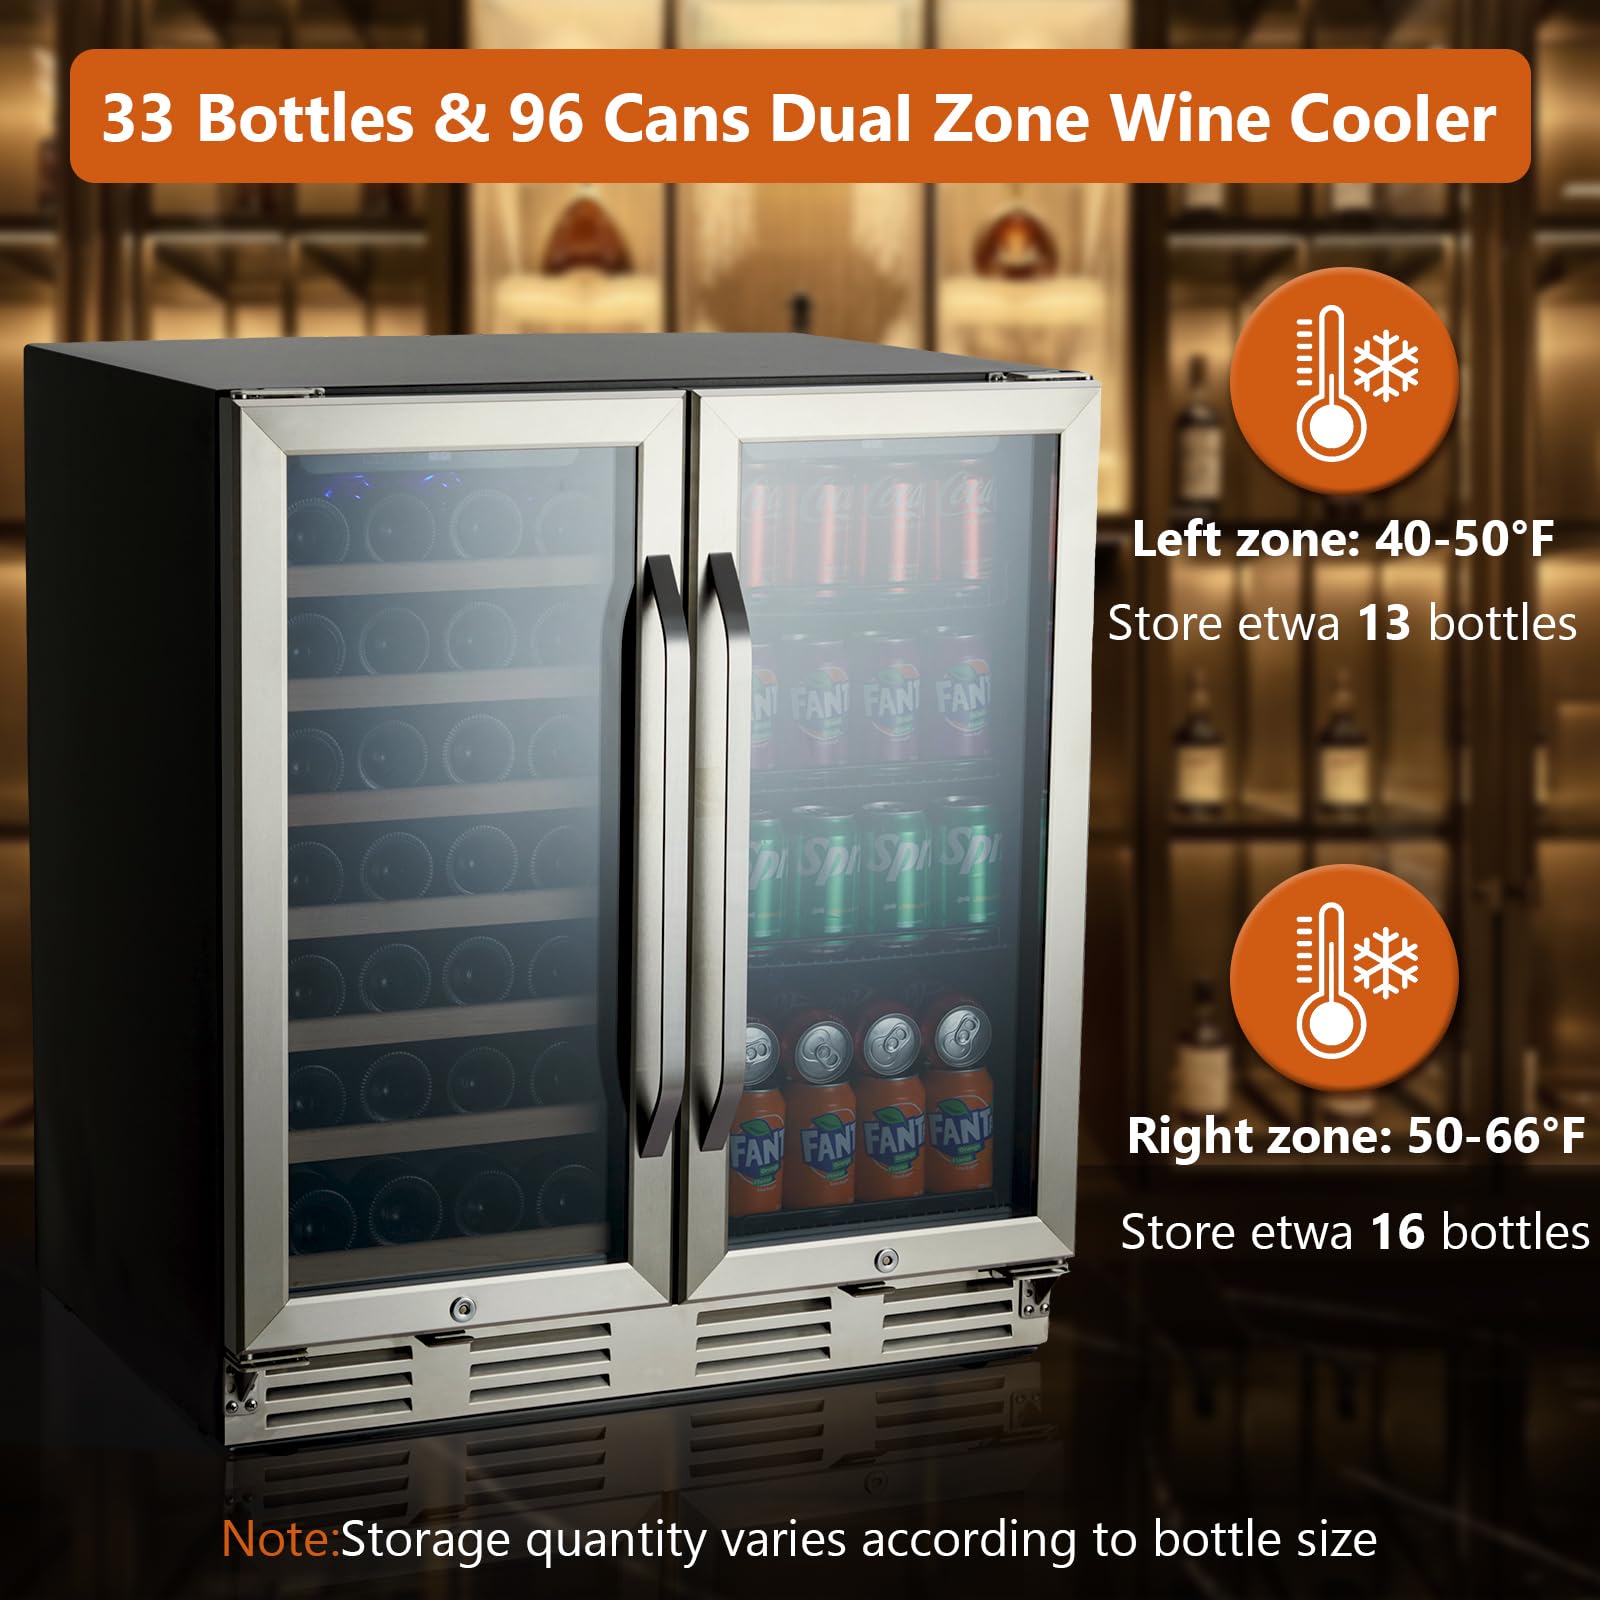 30” Dual Zone Wine Cooler, 33 Bottles & 96 Cans, Stainless Steel